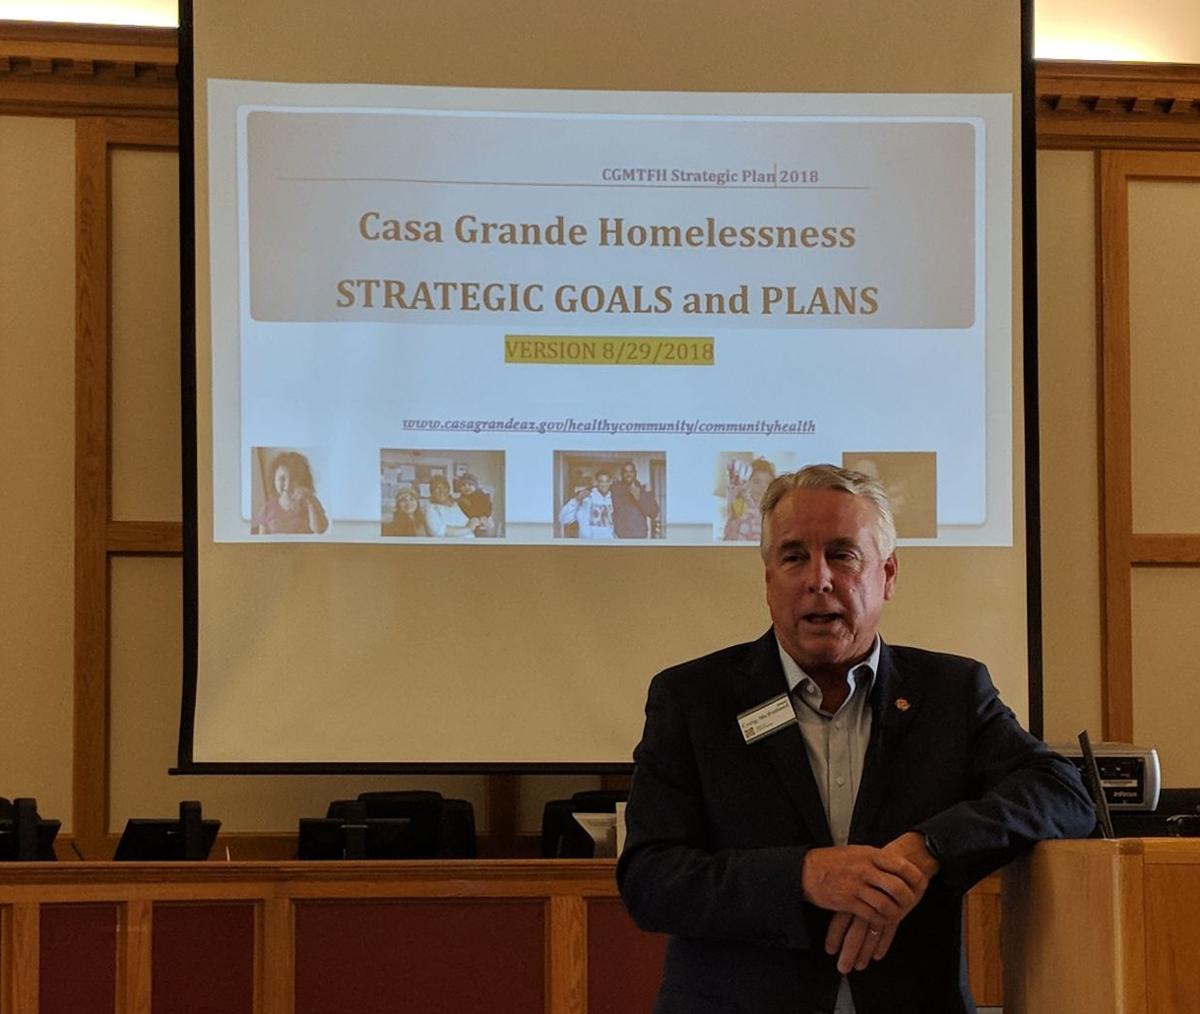 CG homelessness resource center to be opened in the fall